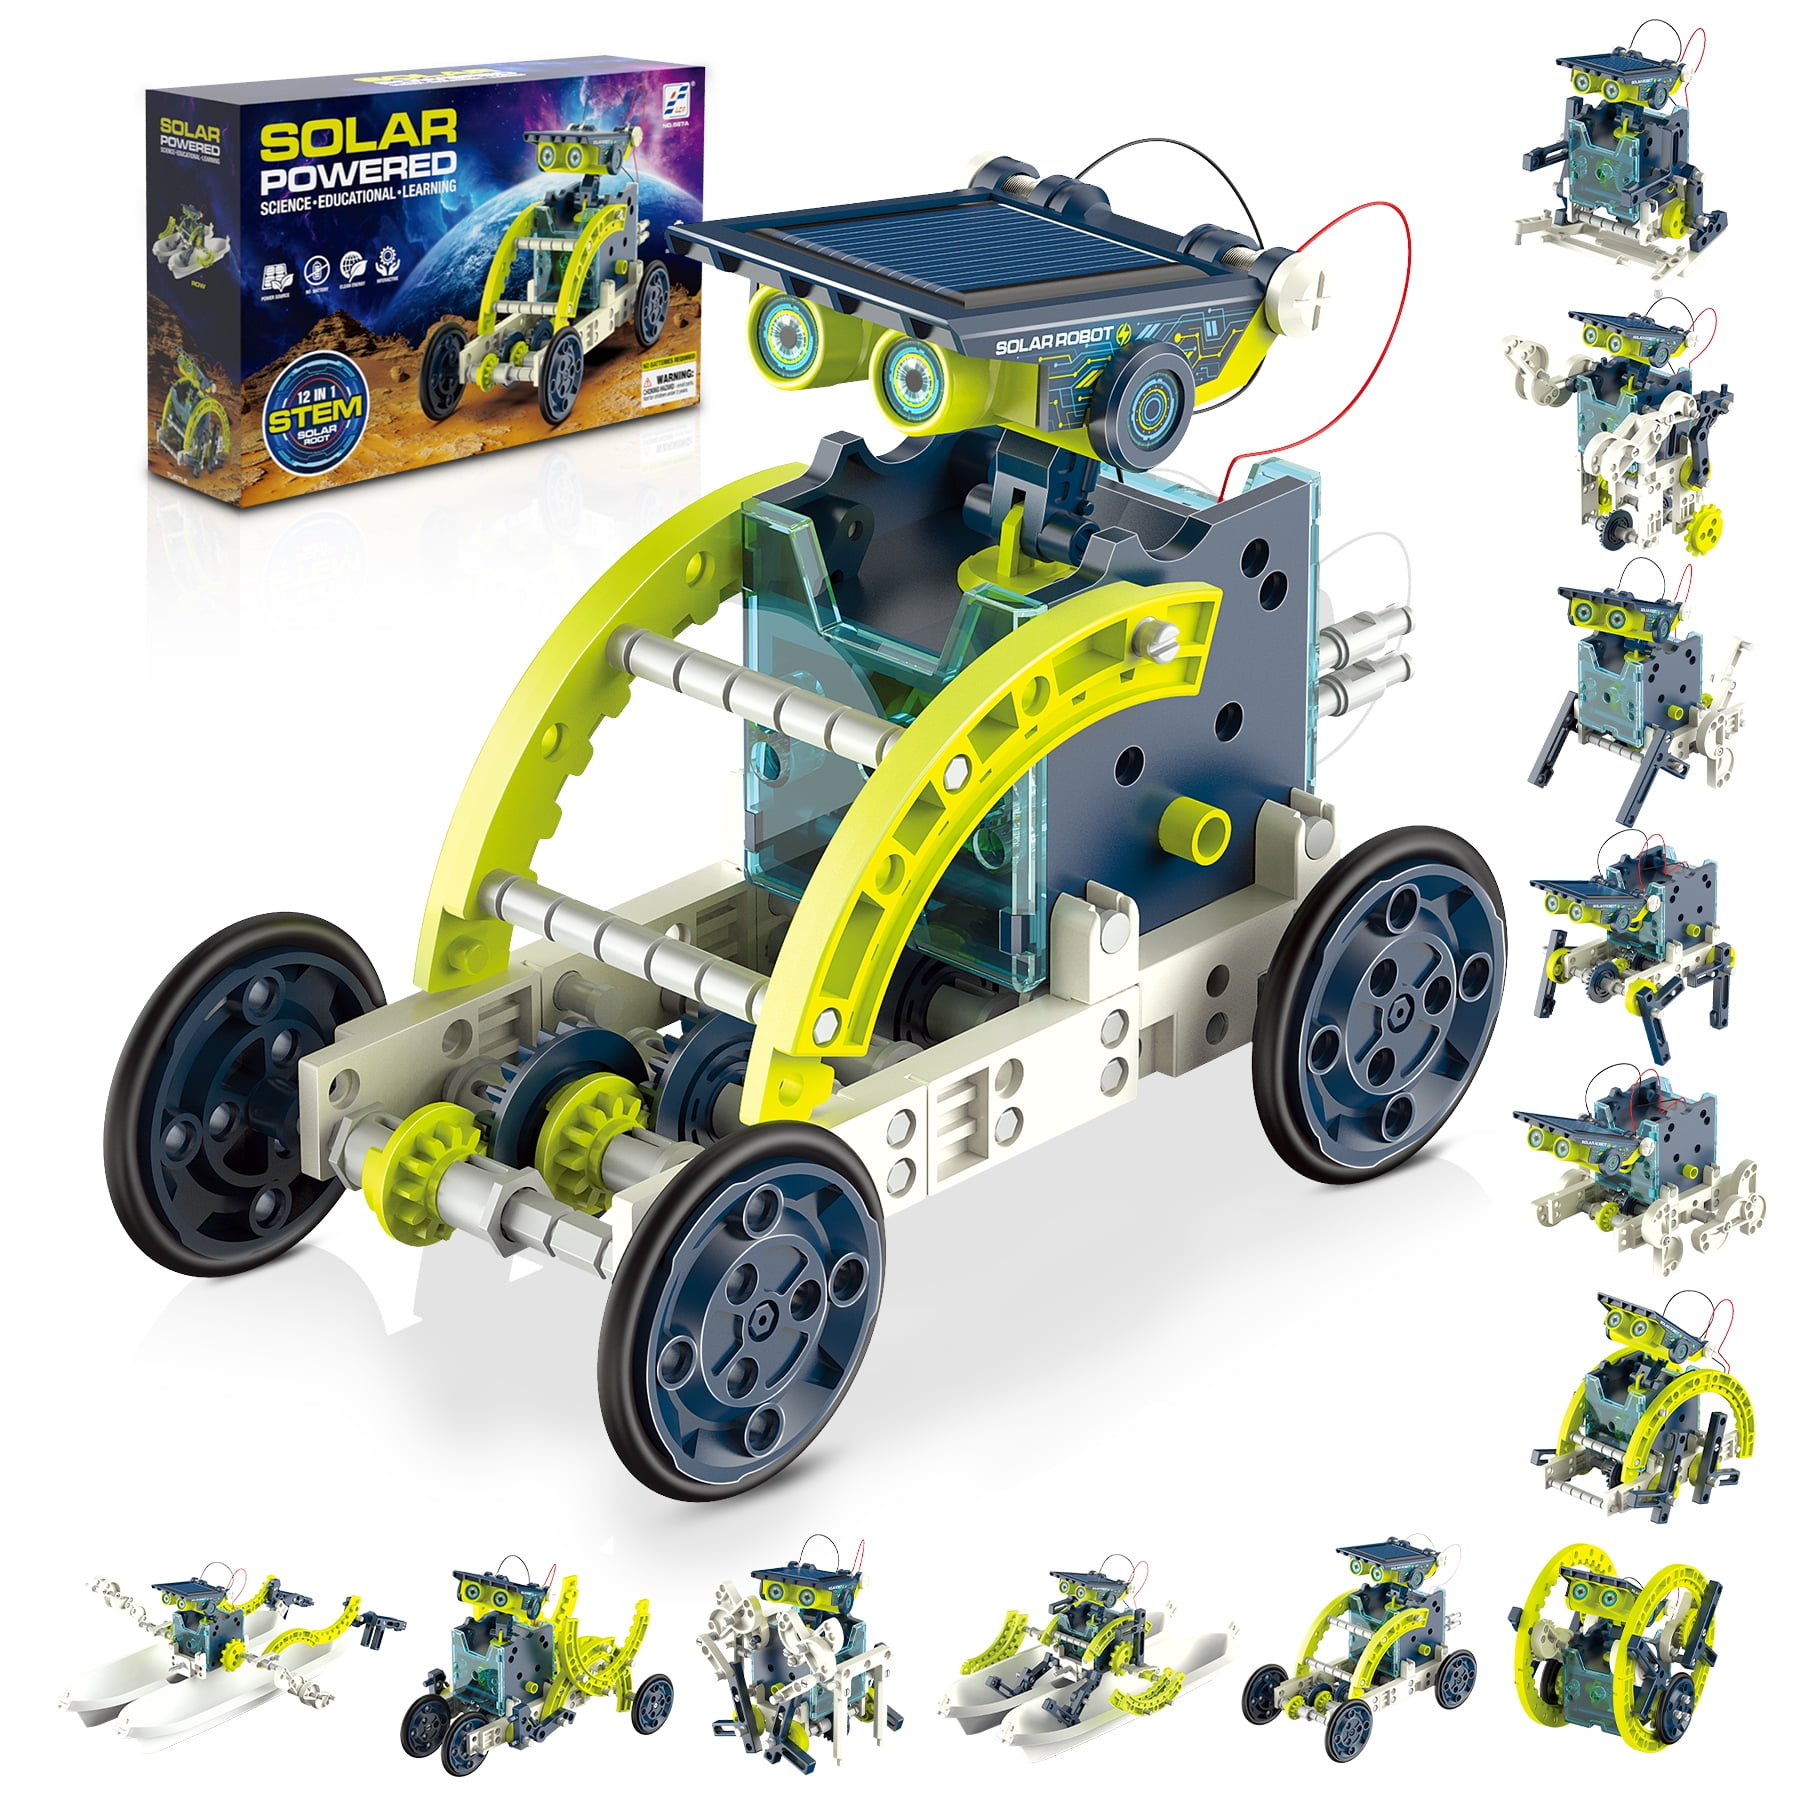 Beefunni 12-in-1 STEM Solar Robot Toys,Educational Building Science ...